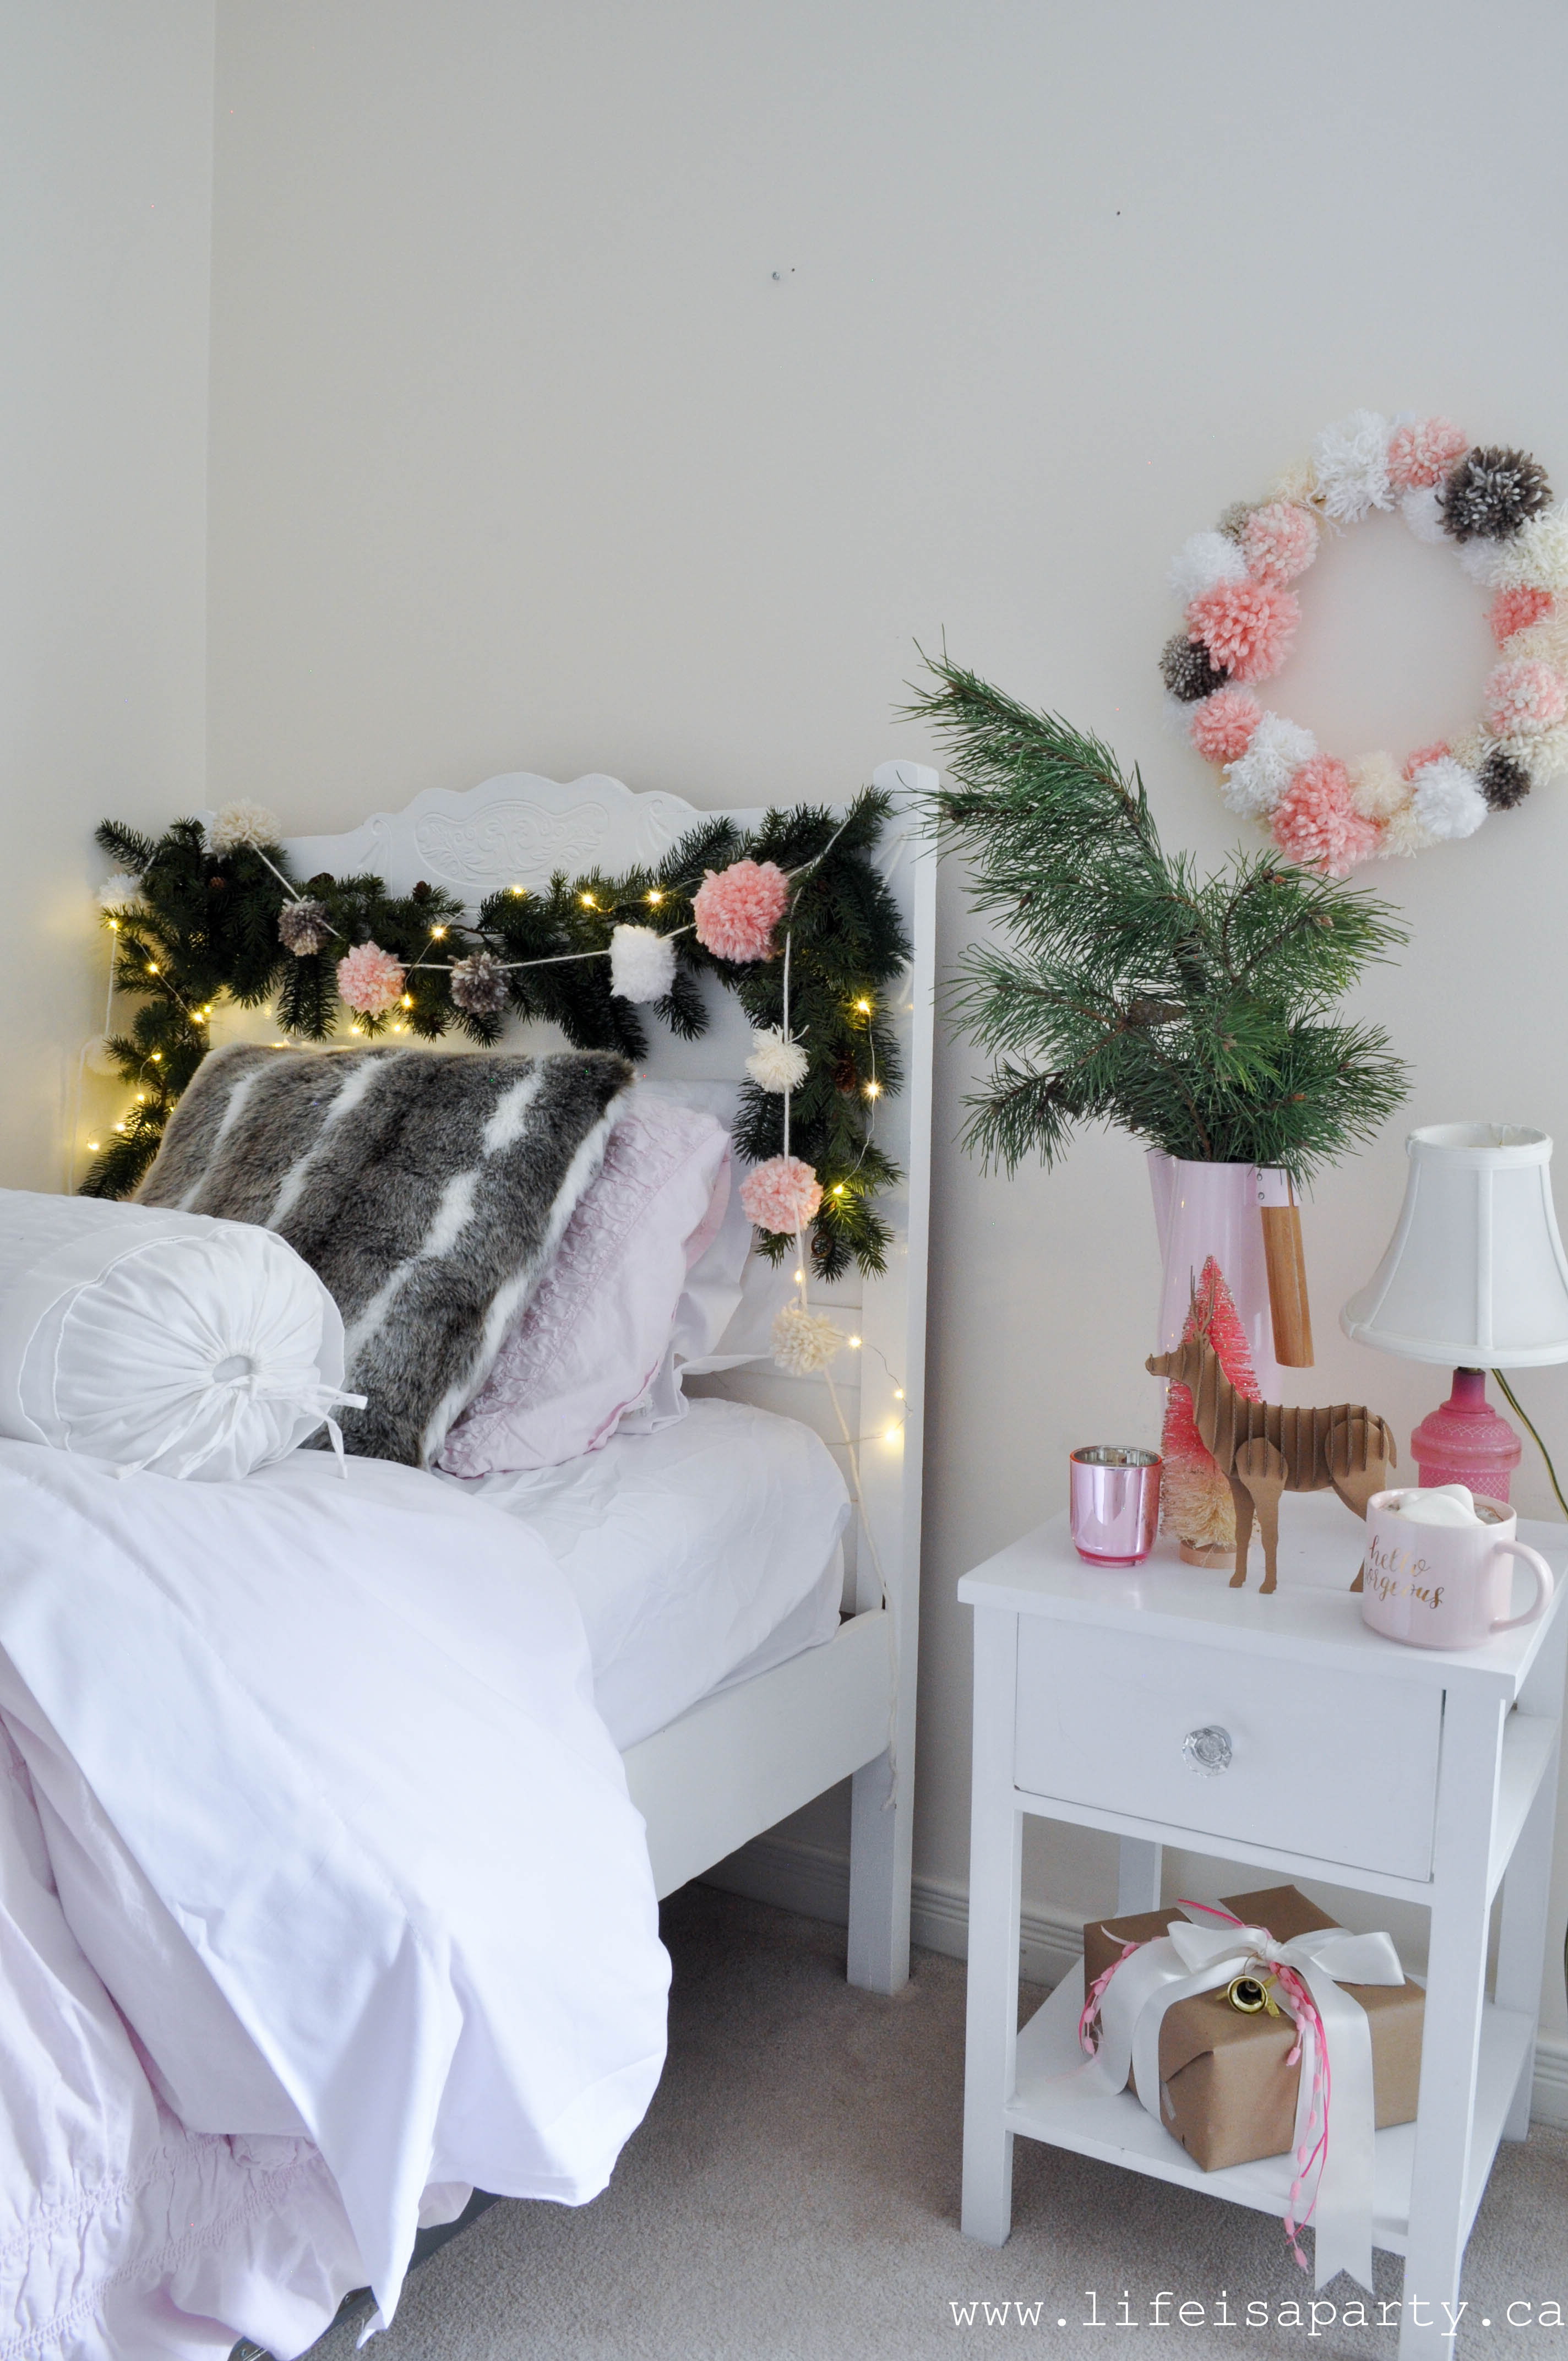 Little Girl's Christmas Bedroom -Add some coziness with warm throws, pom pom garland, and twinkle lights for any little girl's delight!